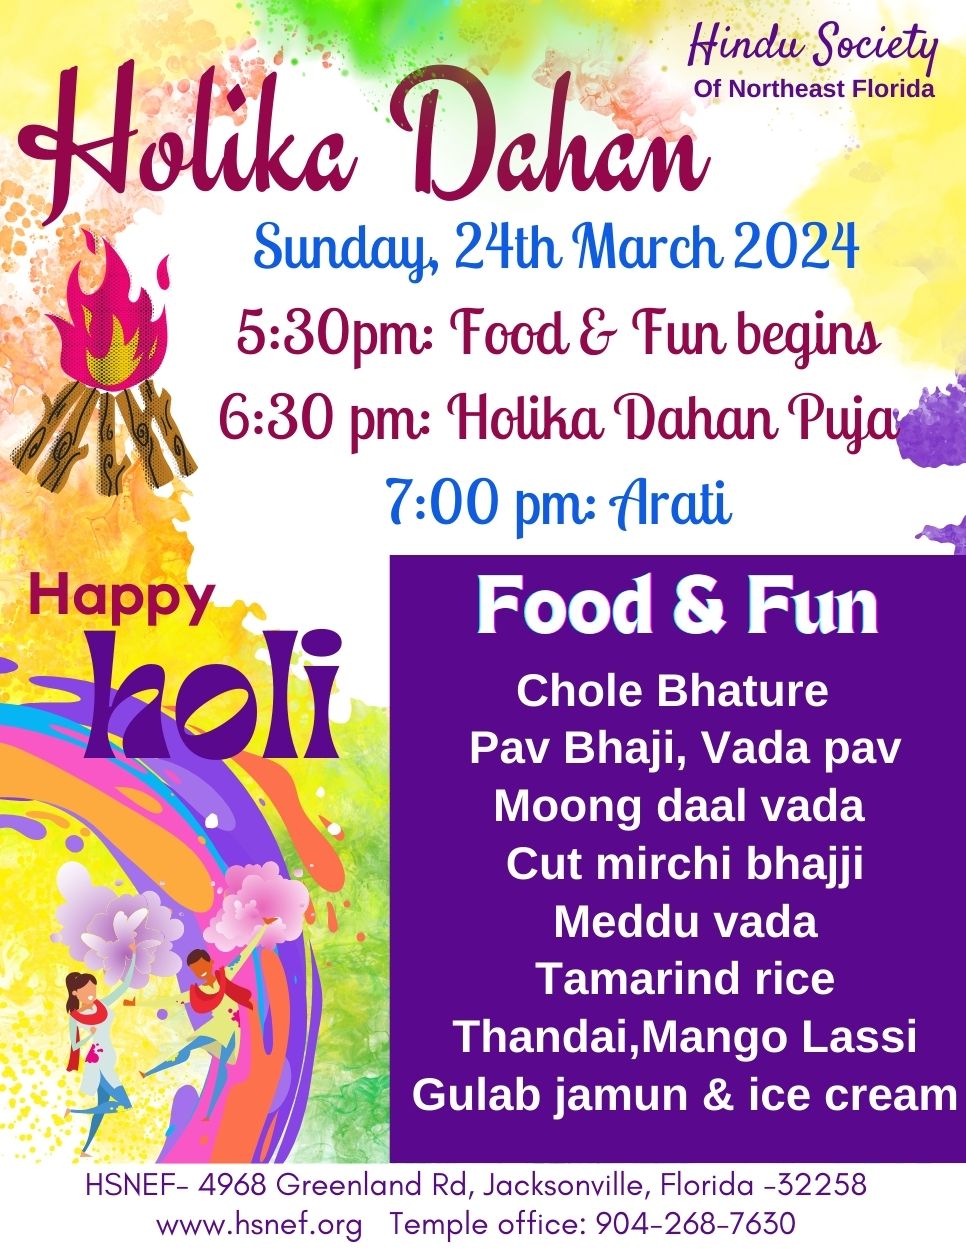 Holika Dahan at HSNEF is being Celebrated on March 24th 2024, with Food and Fun to start at 5:30 PM and Holika Dahan Puja to start at 6:30 PM